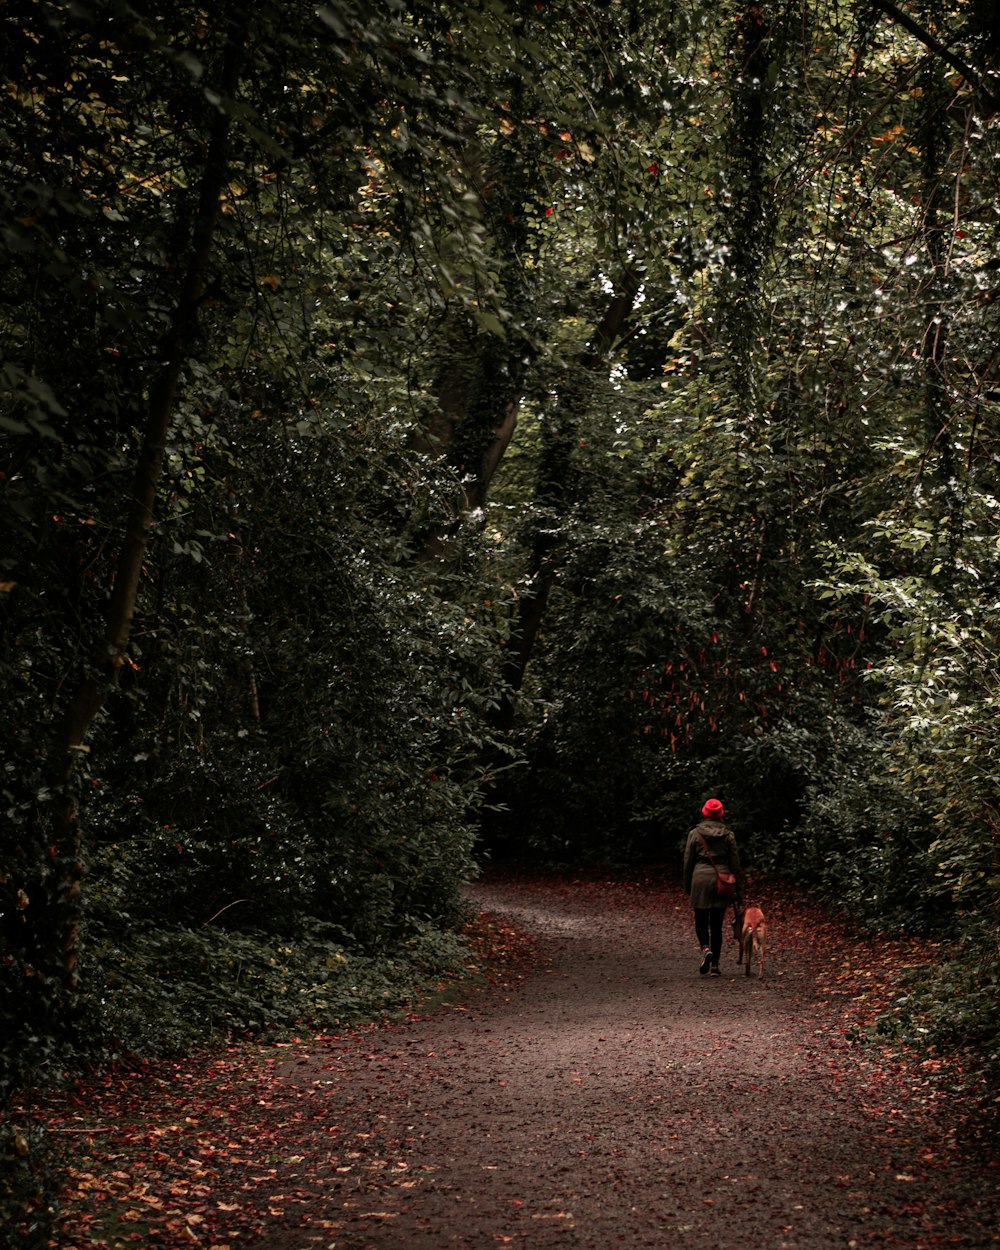 person in red jacket walking on pathway in between trees during daytime